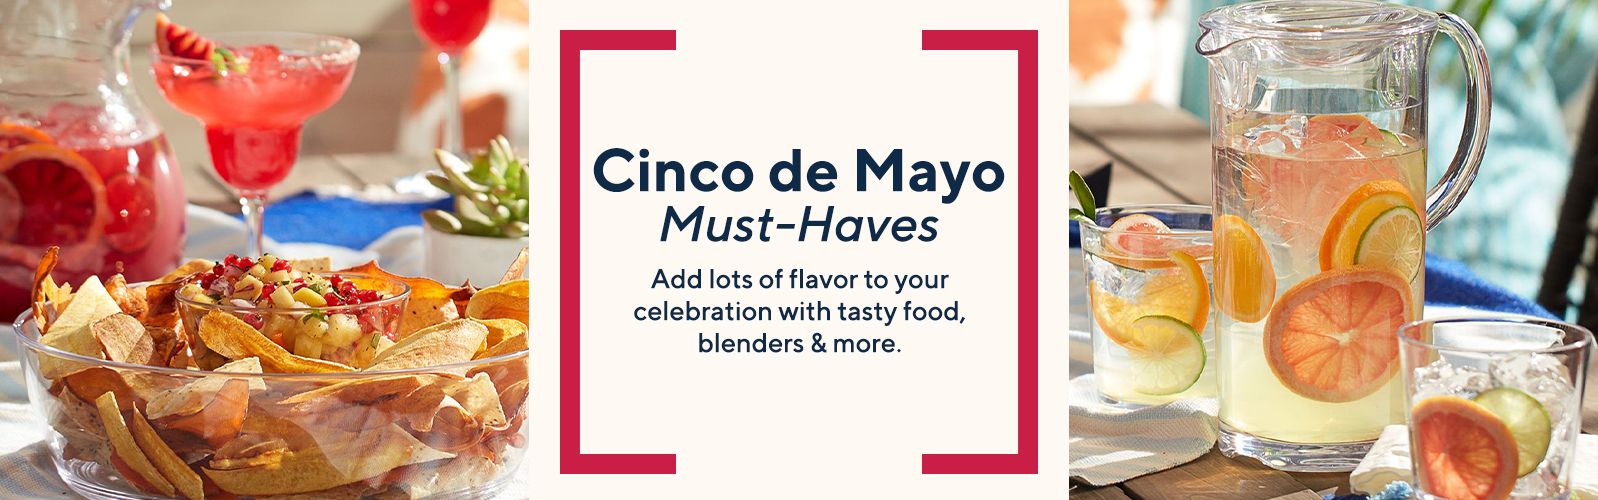 Cinco de Mayo Must-Haves  Add lots of flavor to your celebration with tasty food, blenders & more. 